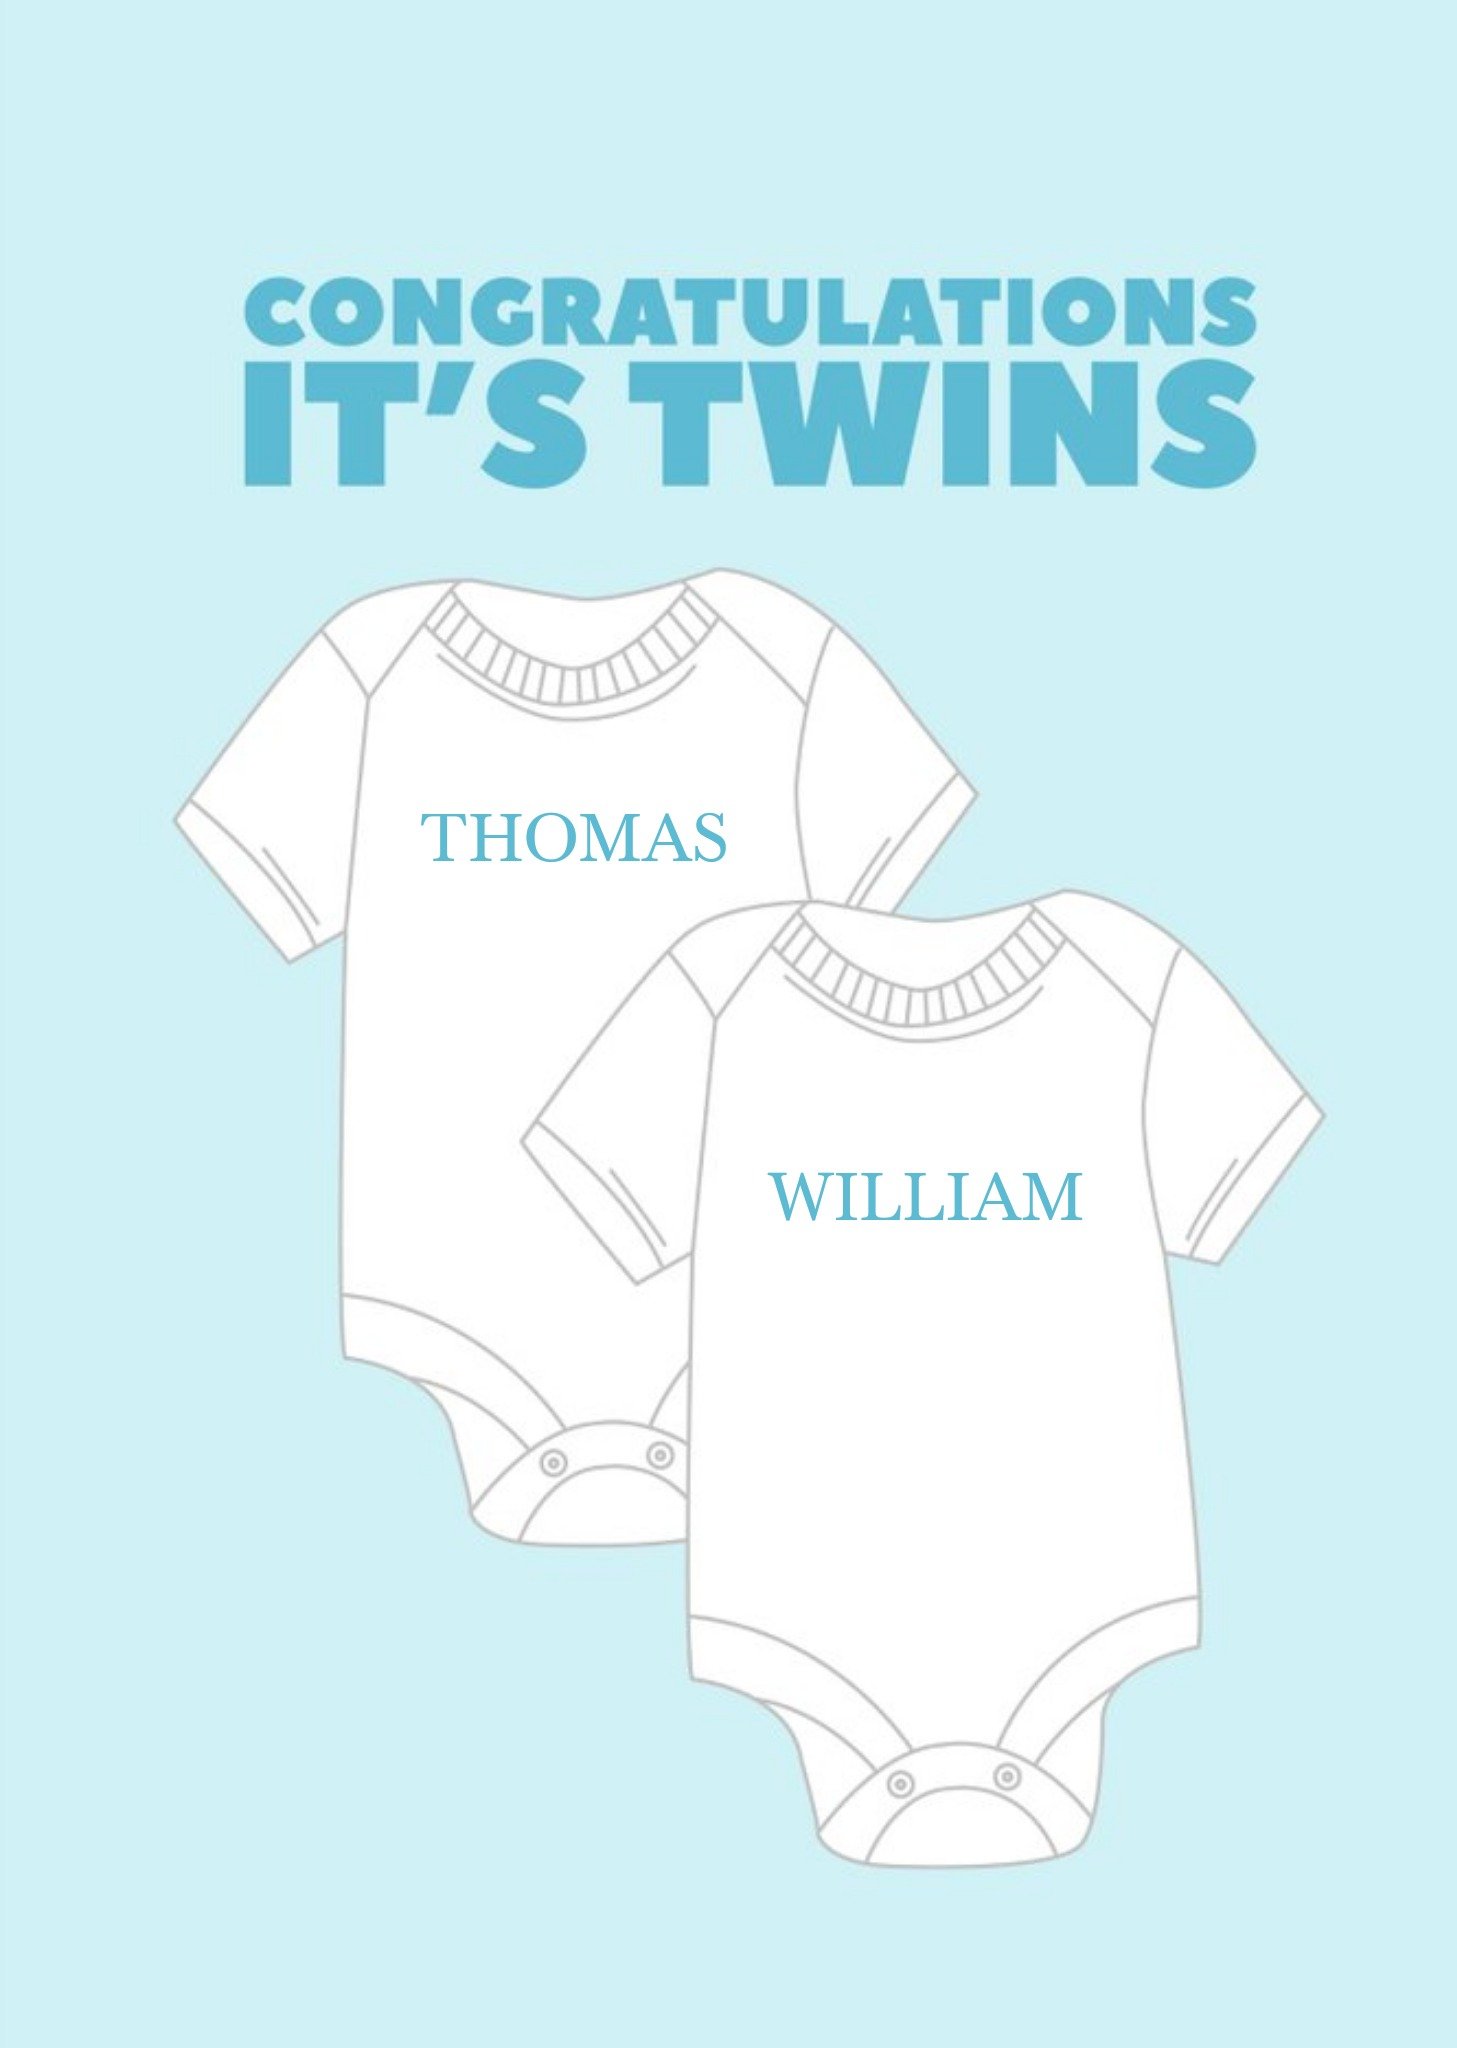 Moonpig Pearl And Ivy Illustrated Baby Grow Twins Congratulations Card, Large